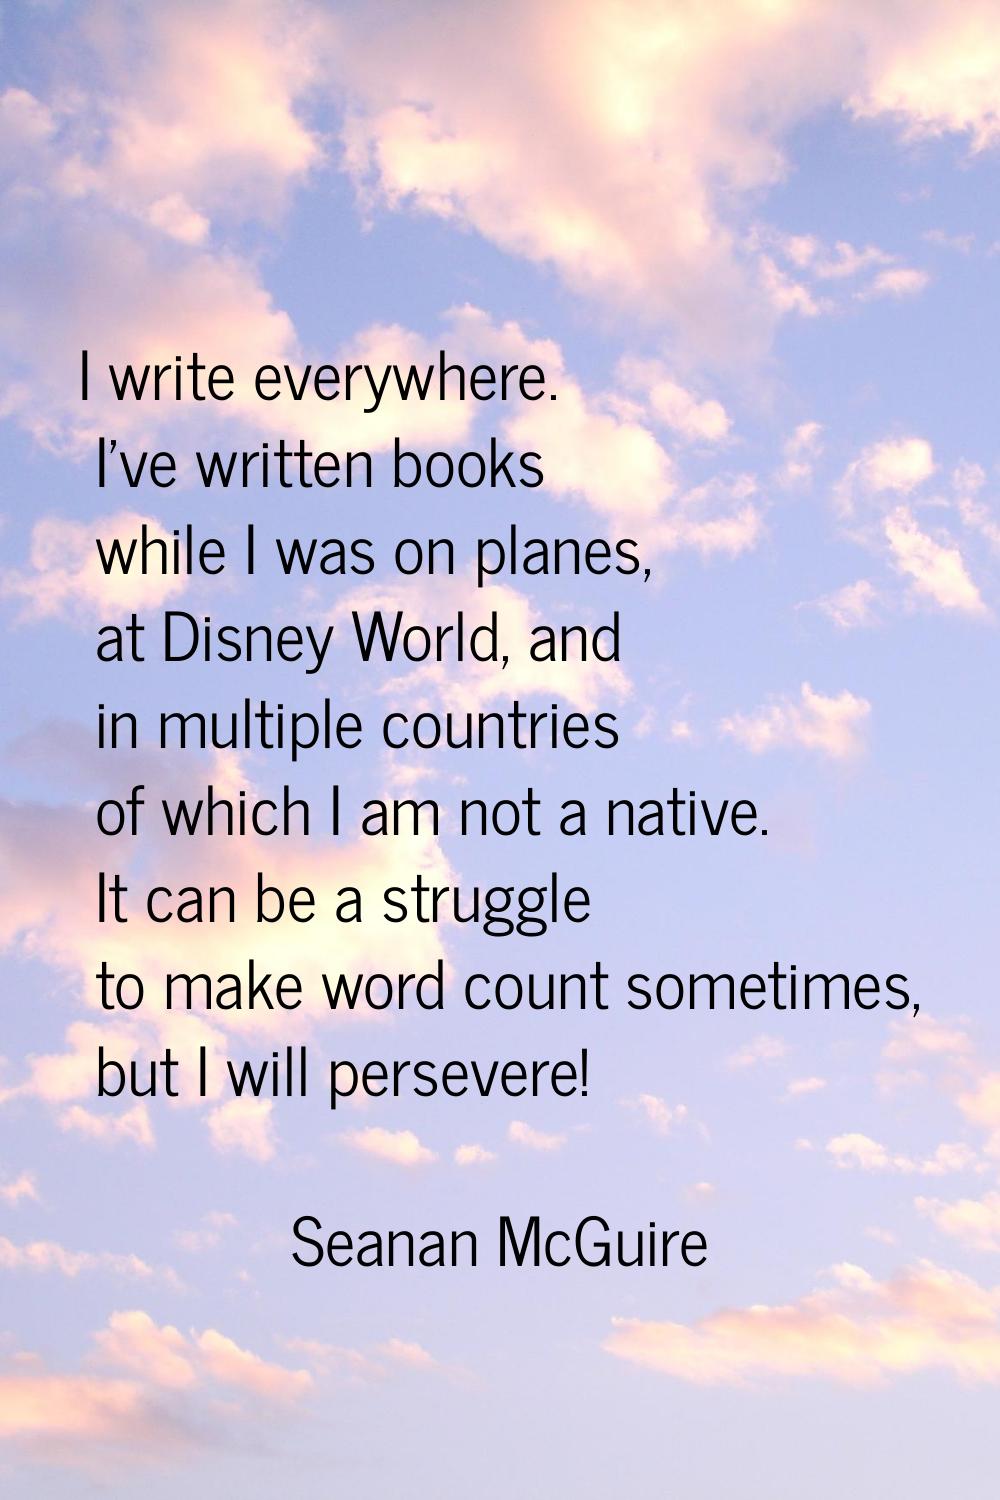 I write everywhere. I've written books while I was on planes, at Disney World, and in multiple coun